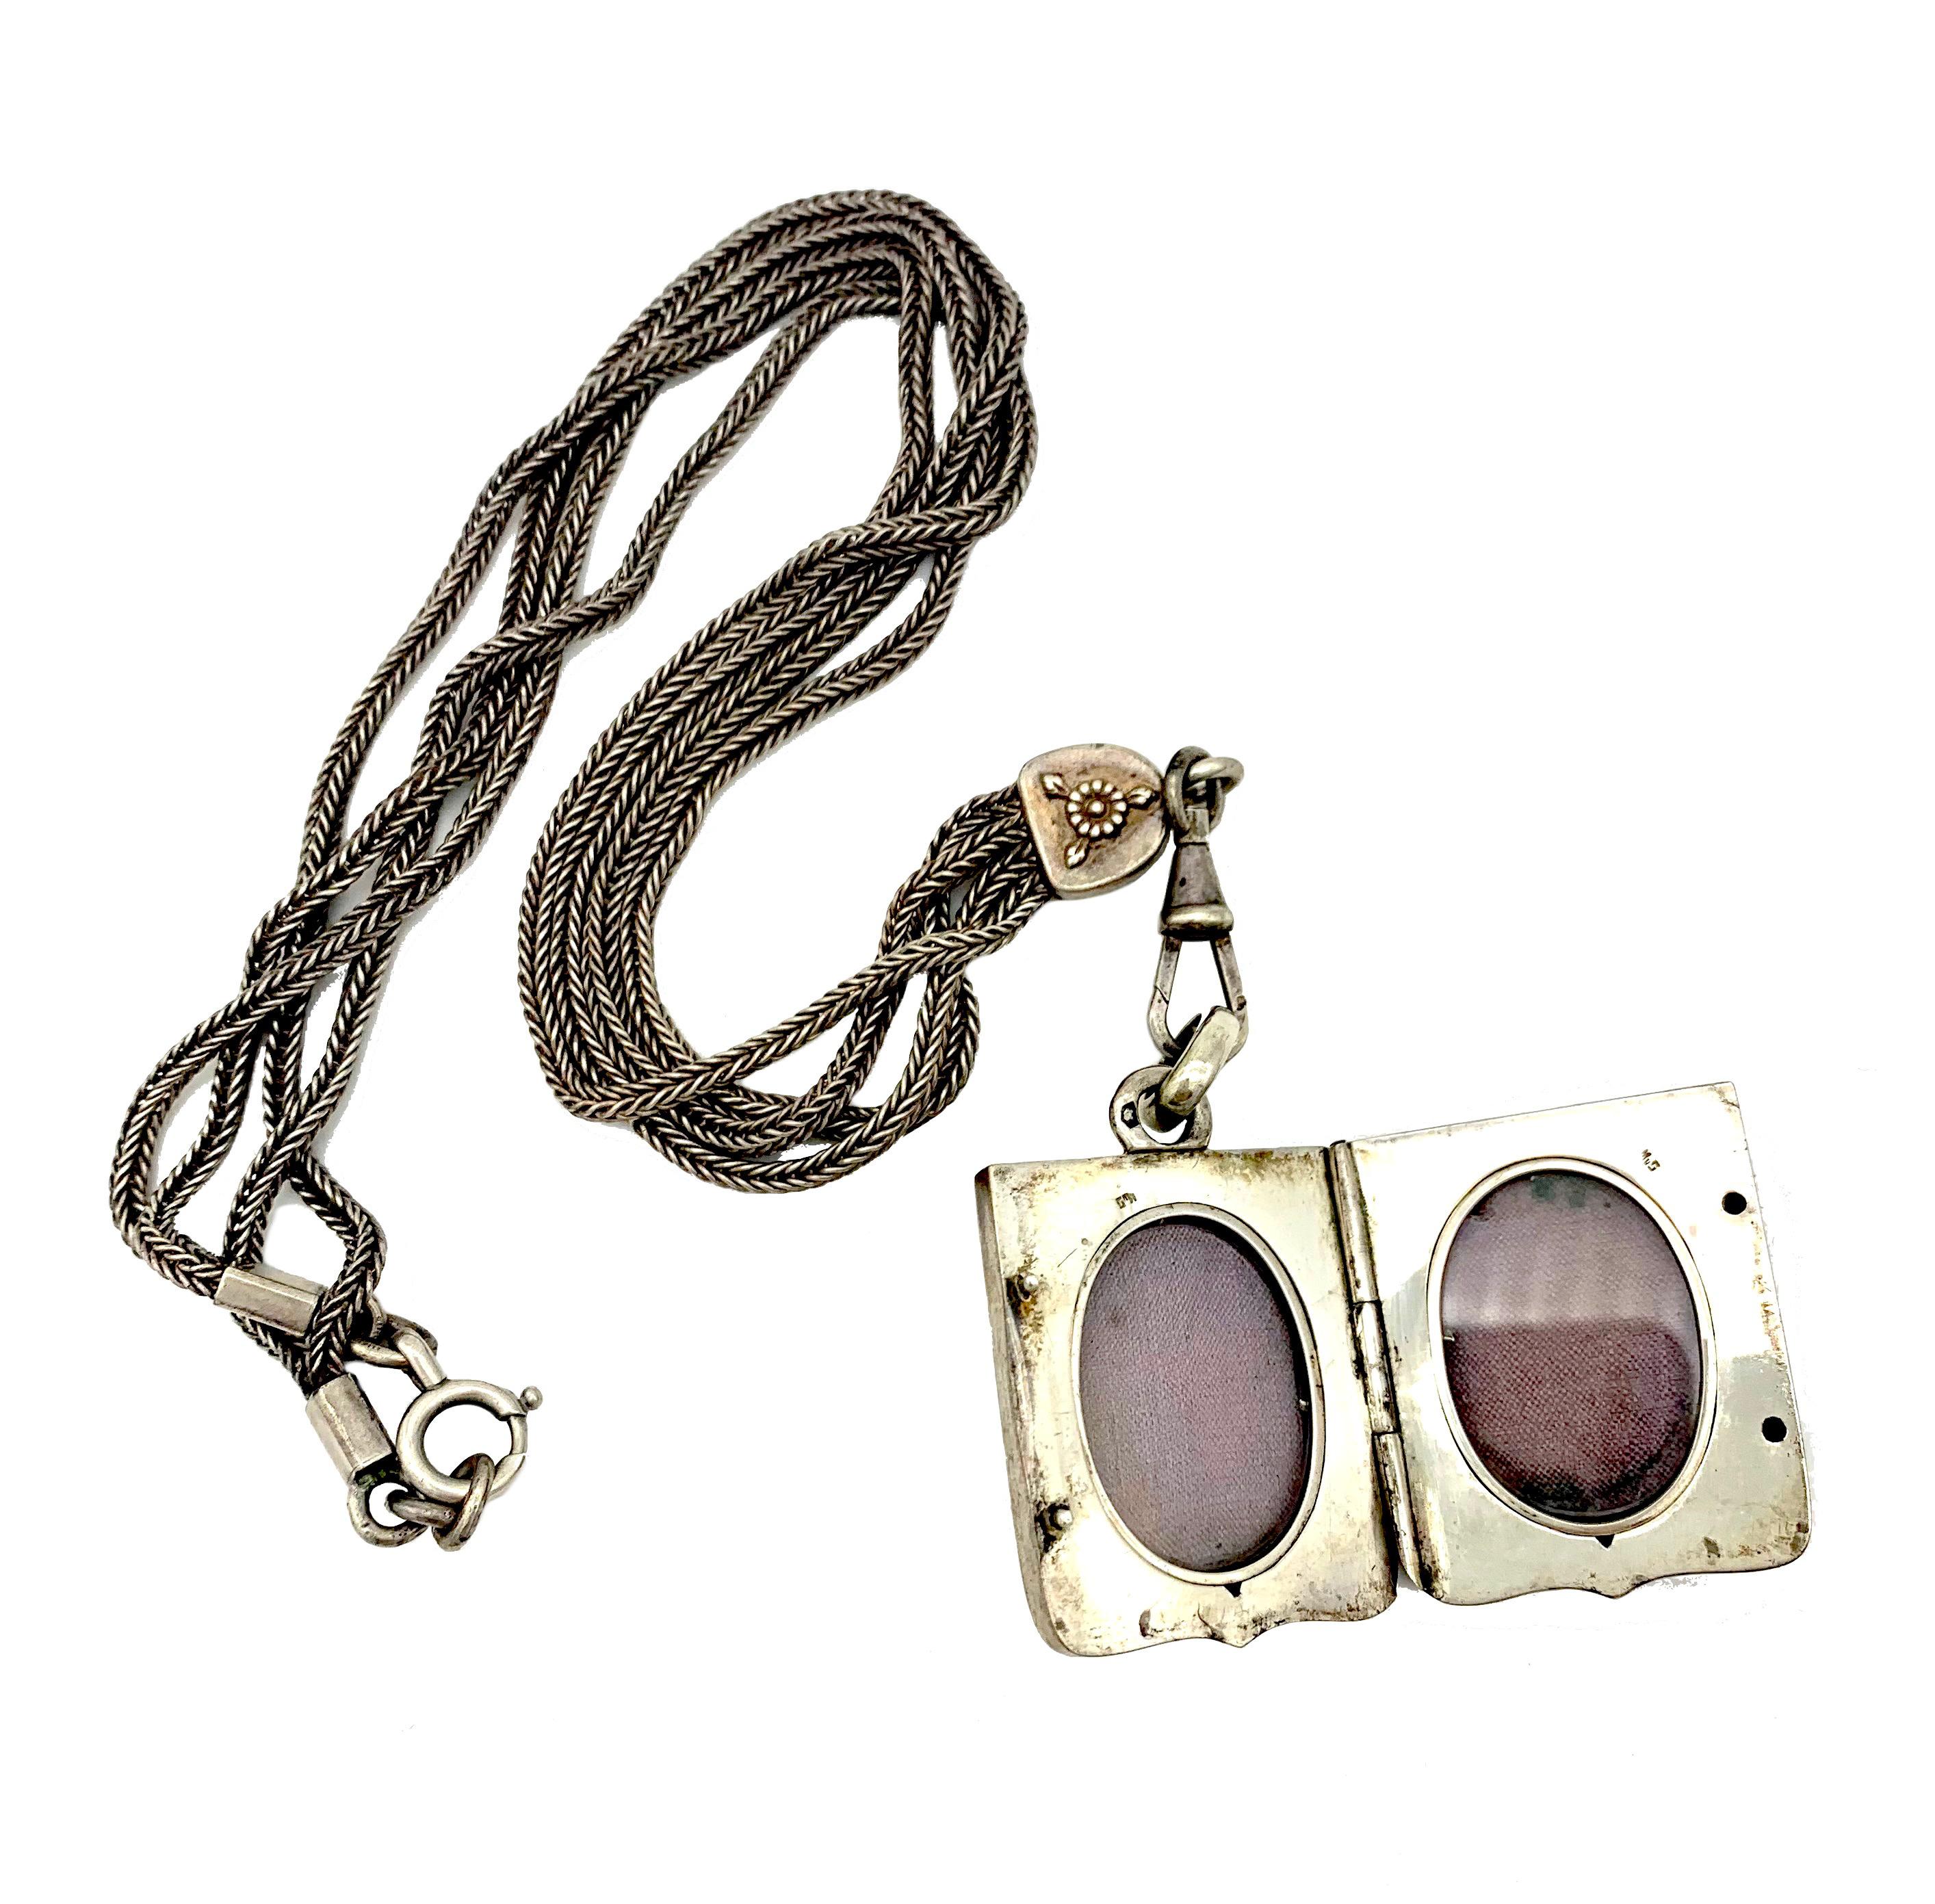 This wonderful silver niello locket is suspended from a double row silver foxtail necklace.  The foxtail chains terminate in a silver element decorated on both sides with a flower in relief.. A swivel suspended from the silver element is holding the